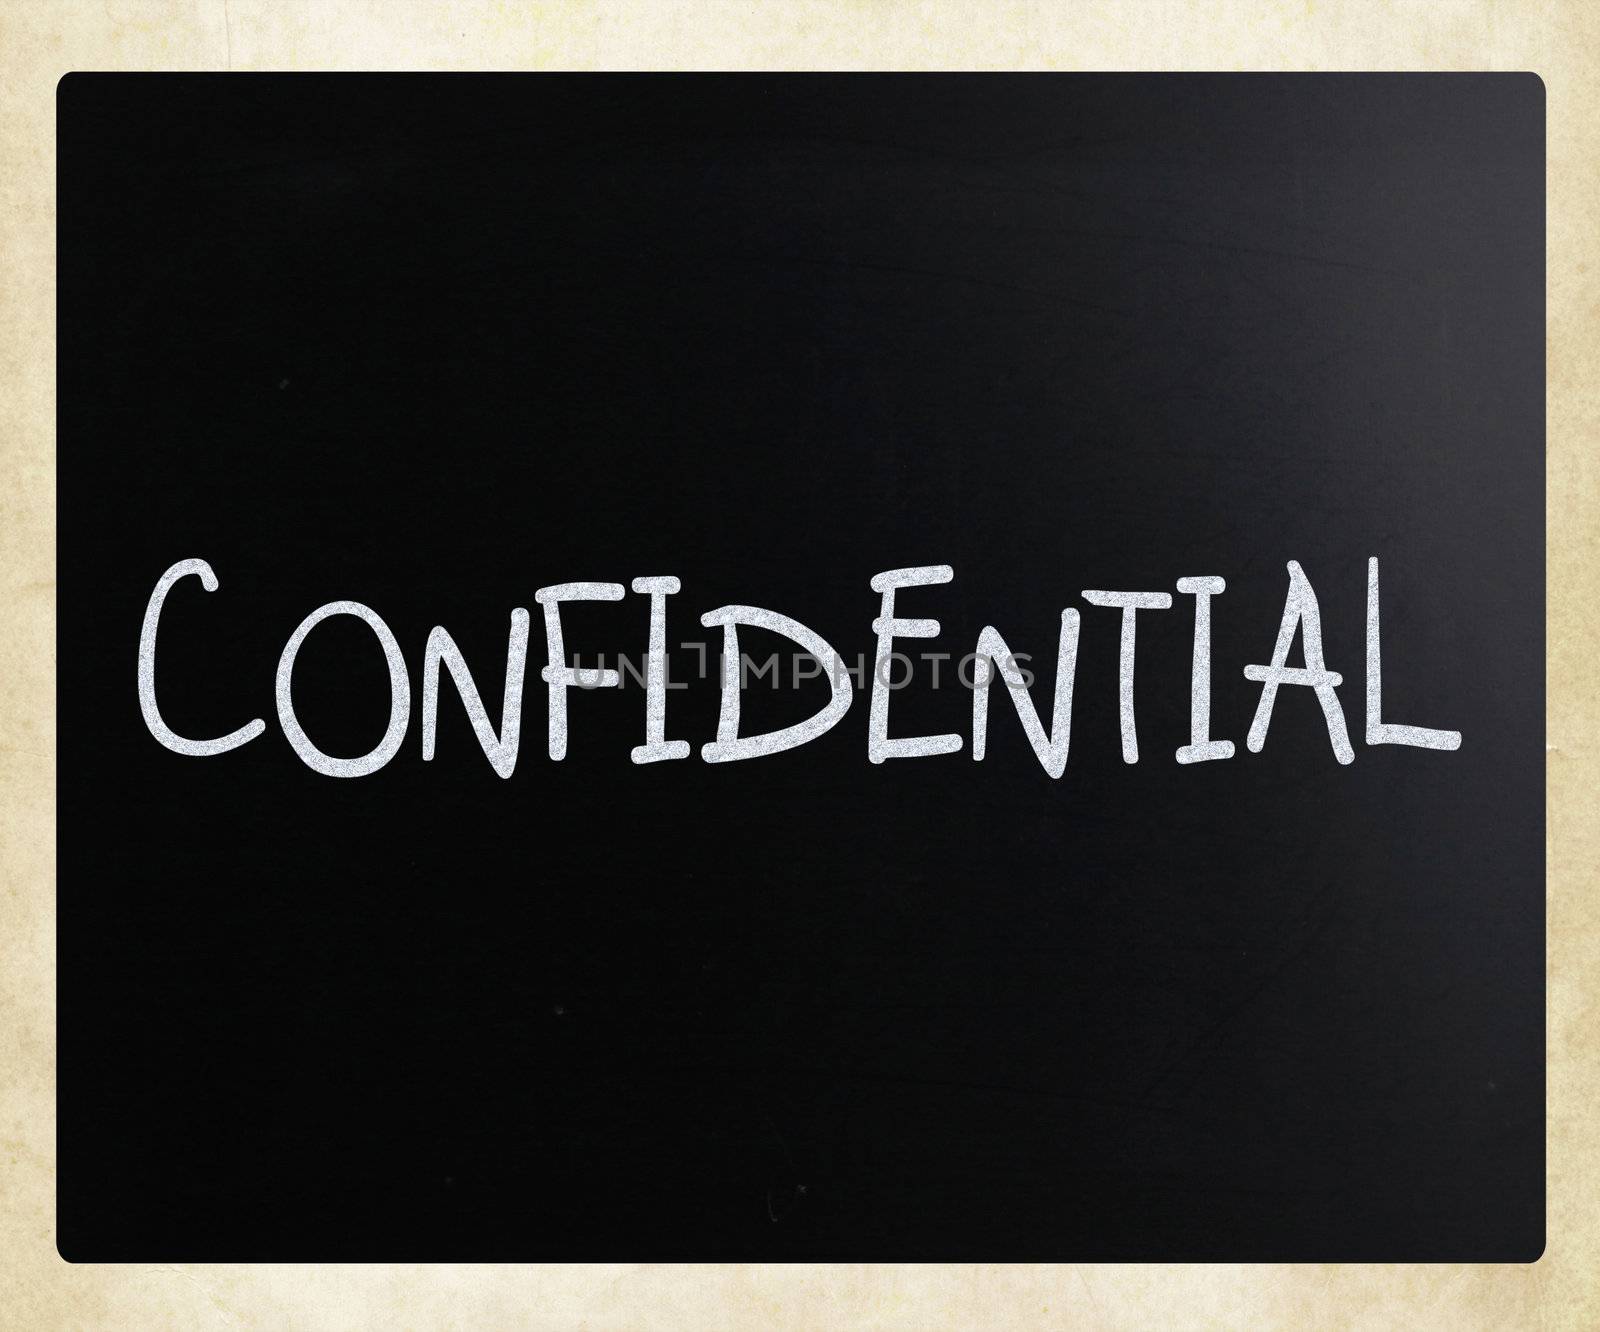 The word "Confidential" handwritten with white chalk on a blackboard